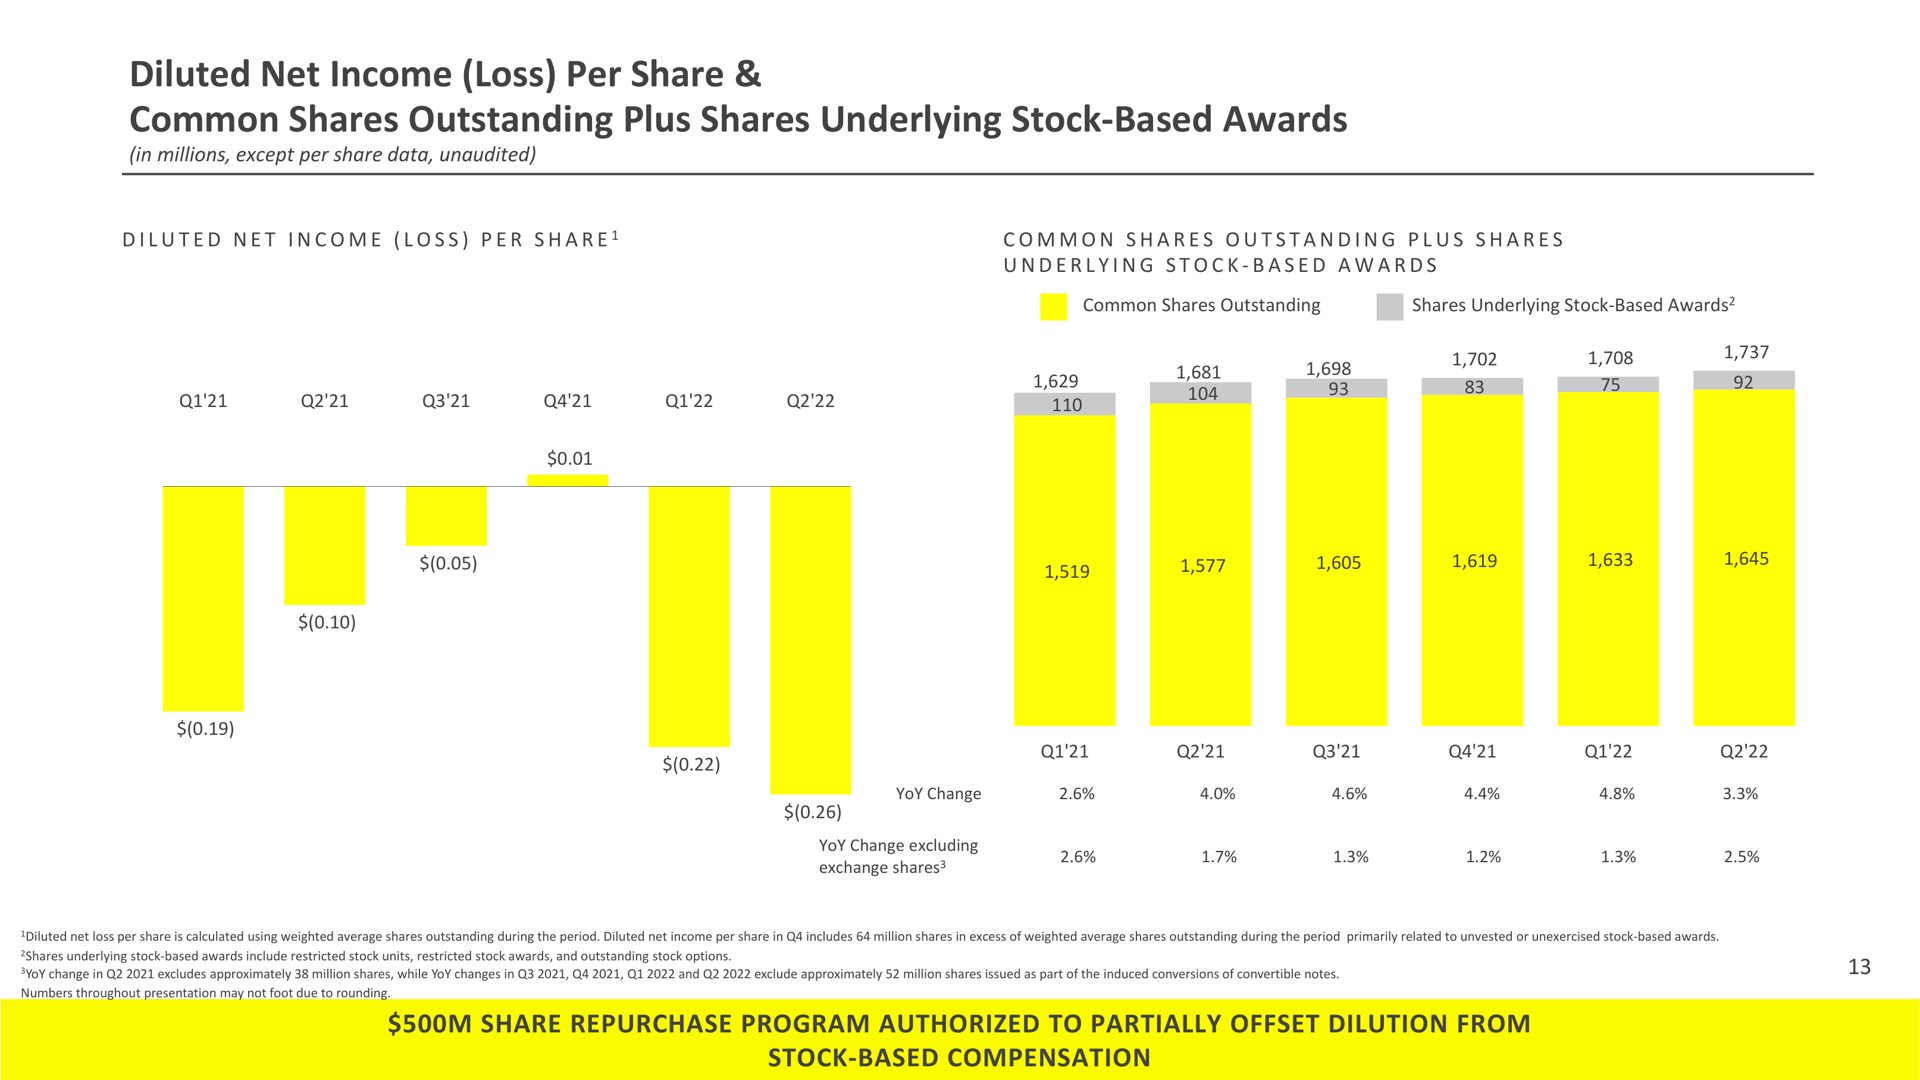 diluted net income loss per share common shares outstanding plus shares underlying stock based awards share repurchase program authorized to partially offset dilution from stock based compensation toy excluding | Snap Inc